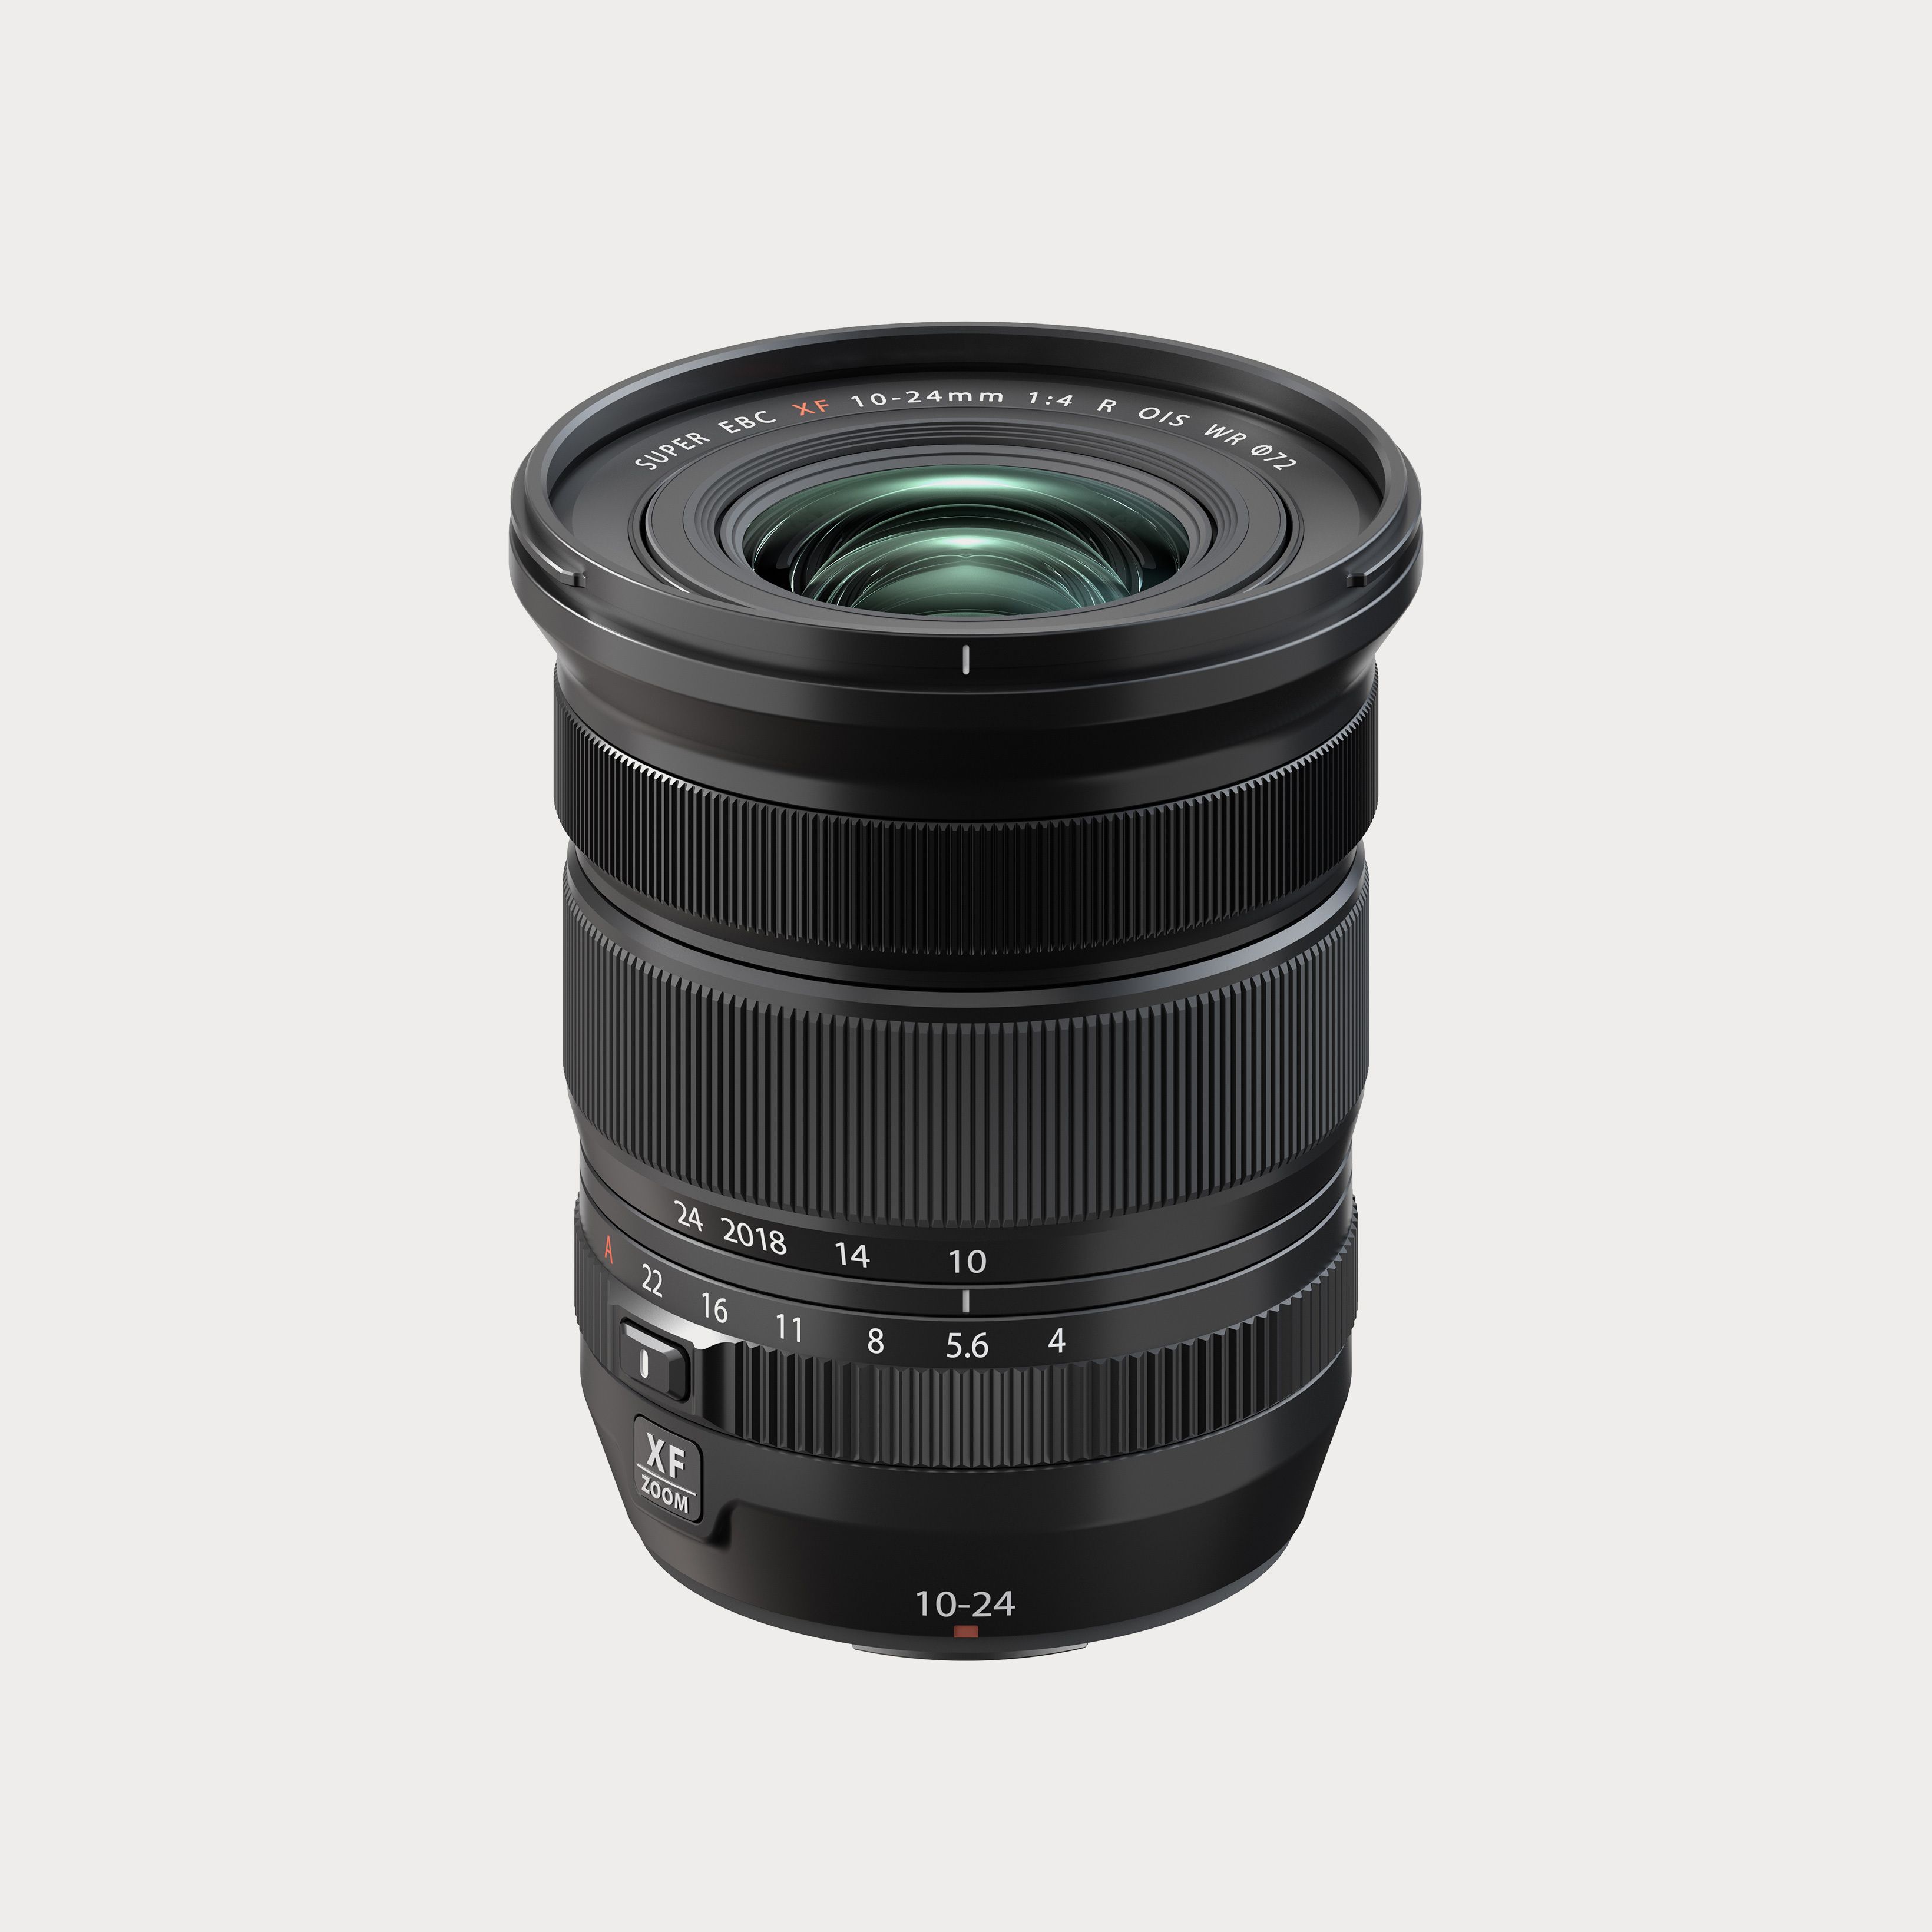 XF 18mm F1.4 R LM WR Lens | Moment